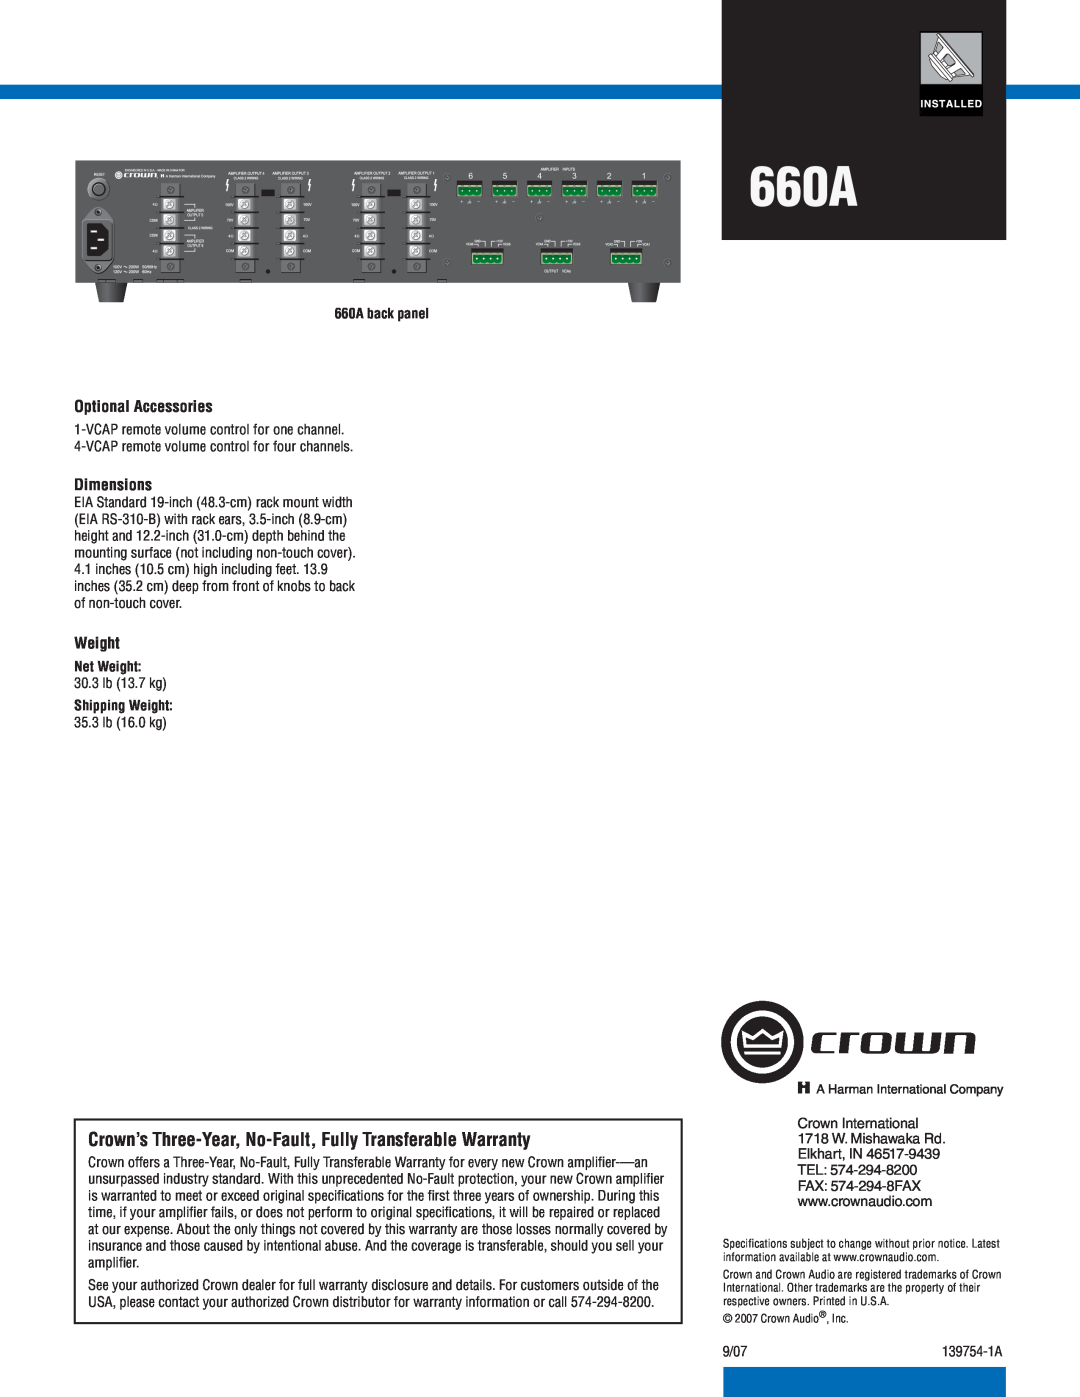 Crown Audio specifications Optional Accessories, Dimensions, 660A back panel, Net Weight, Shipping Weight 